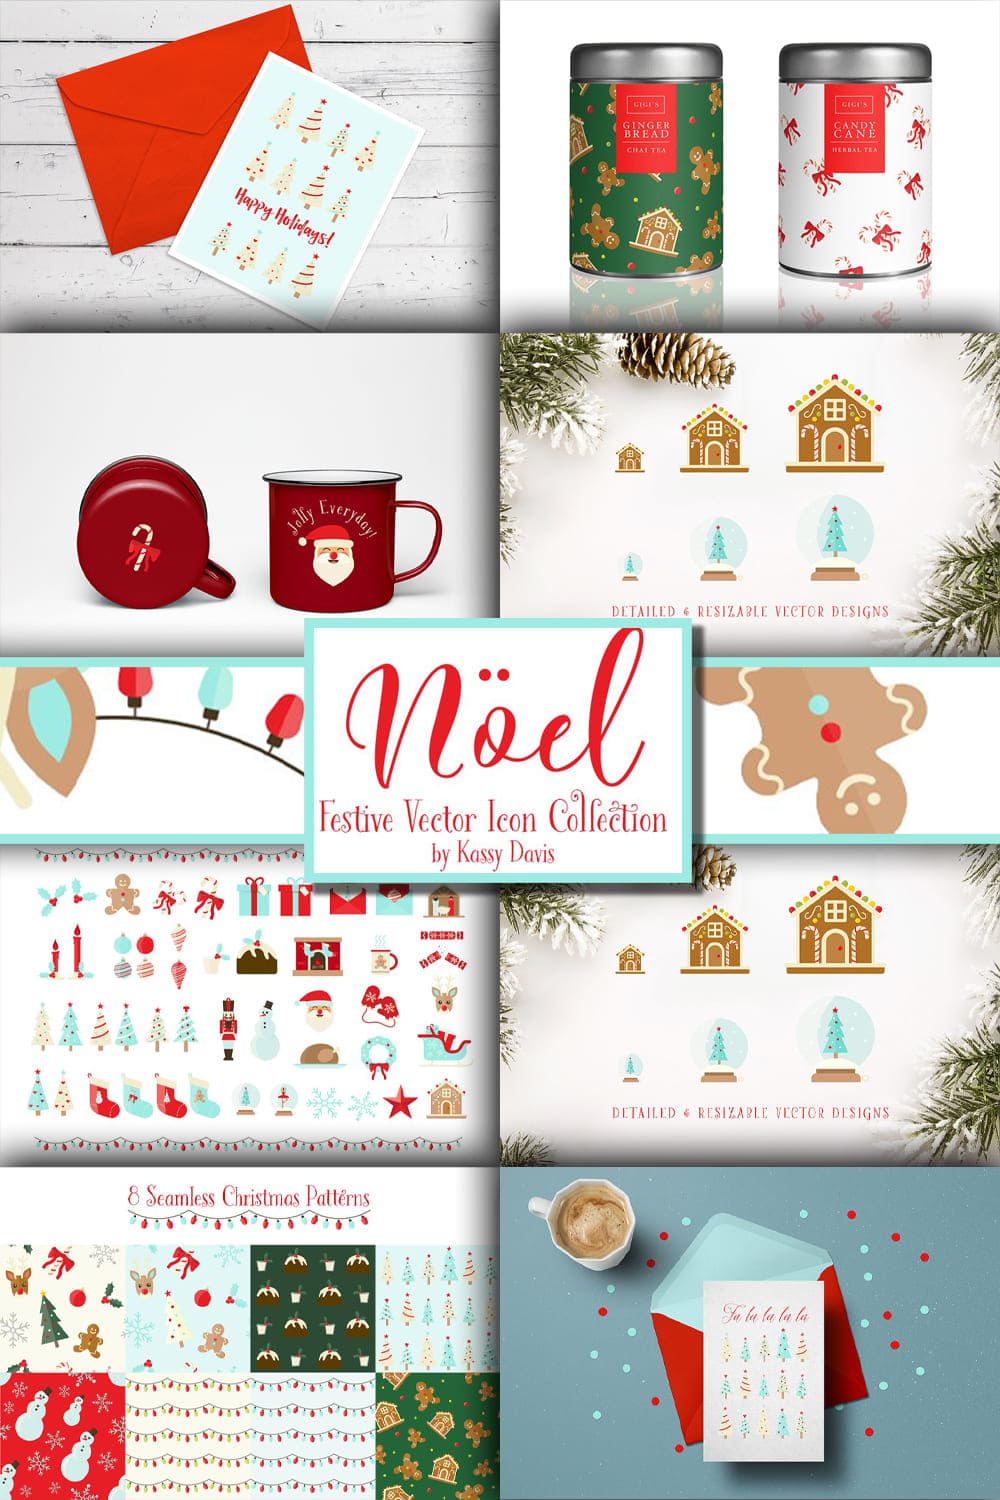 Noel holiday icon collection, picture for Pinterest 1000x1500.